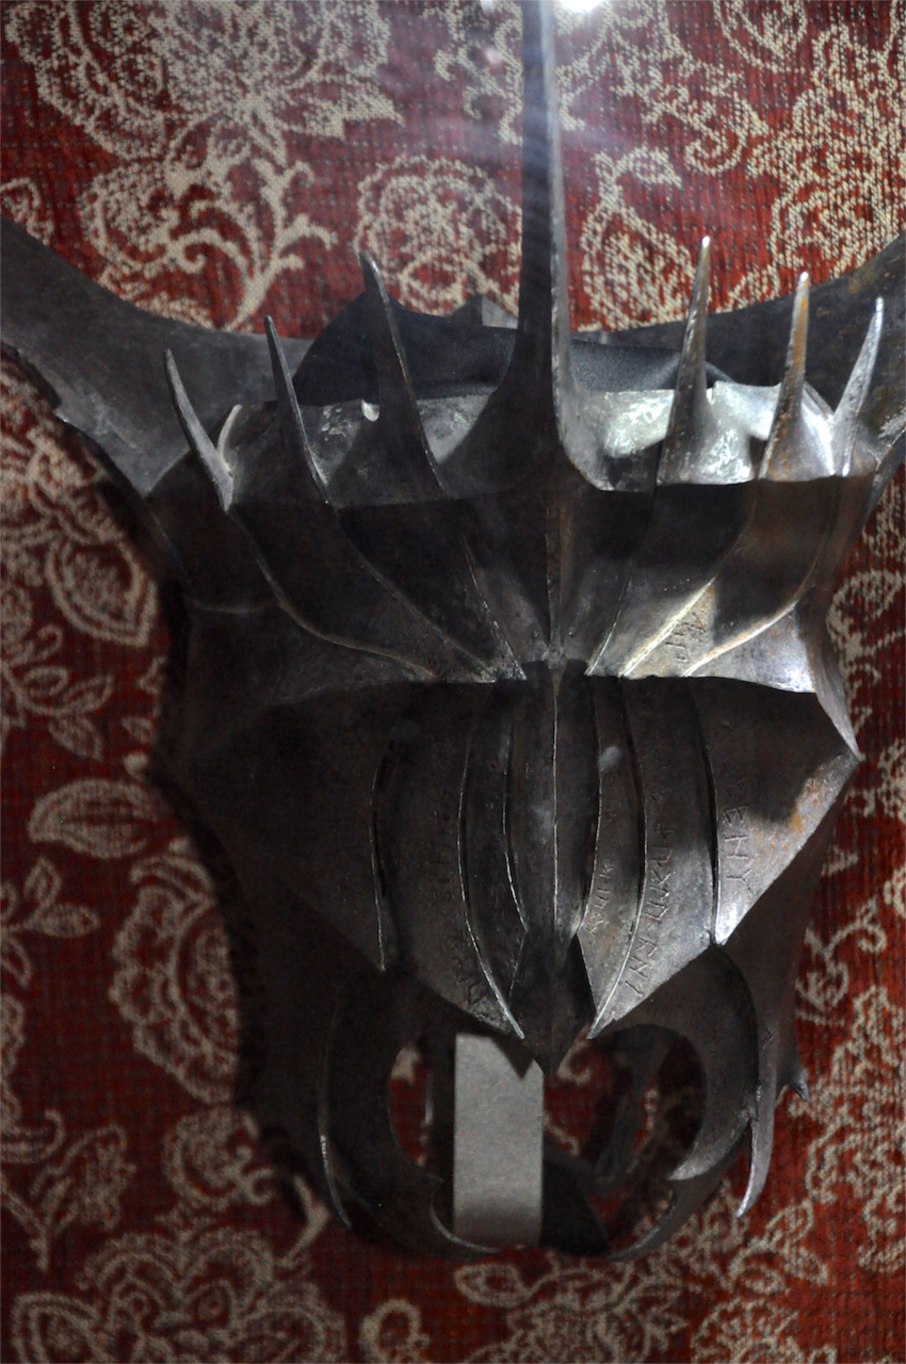 LOTR - Mouth of Sauron